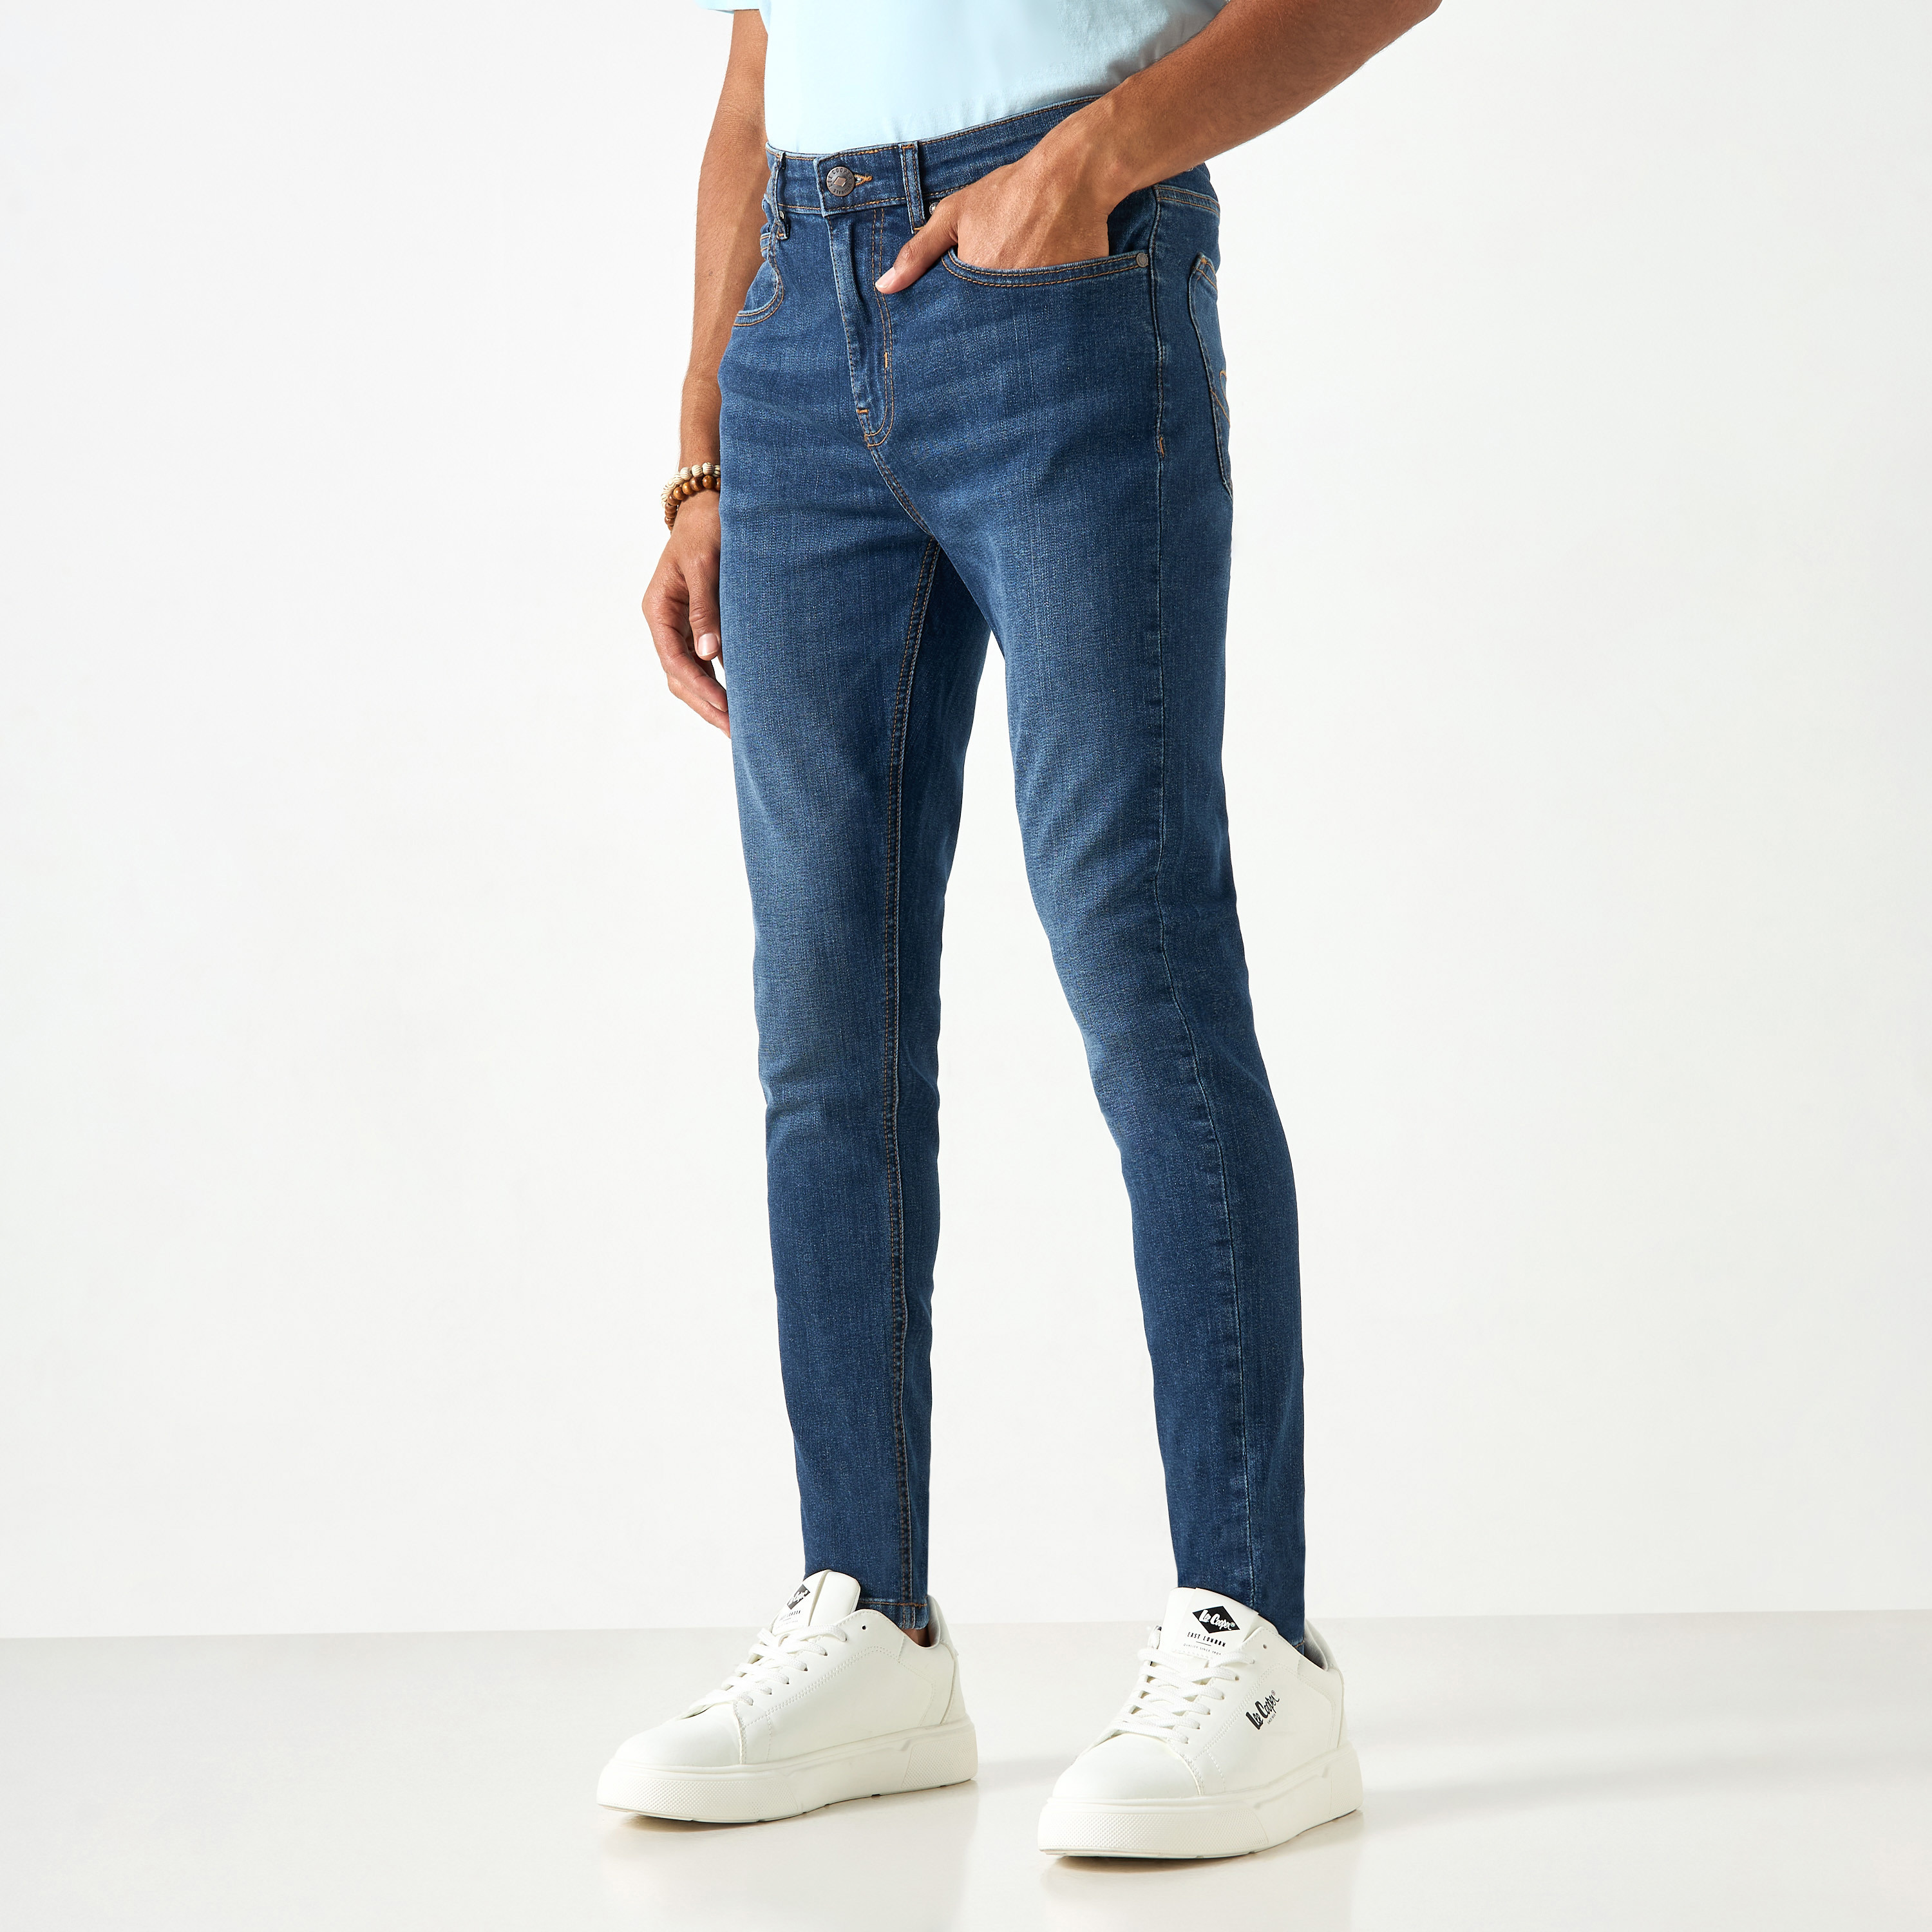 LEE COOPER Brand Men Skinny Fit Stretchable Ripped Jeans (LC-111-151-SA) –  BILLY JEANS CONCEPT SHOP